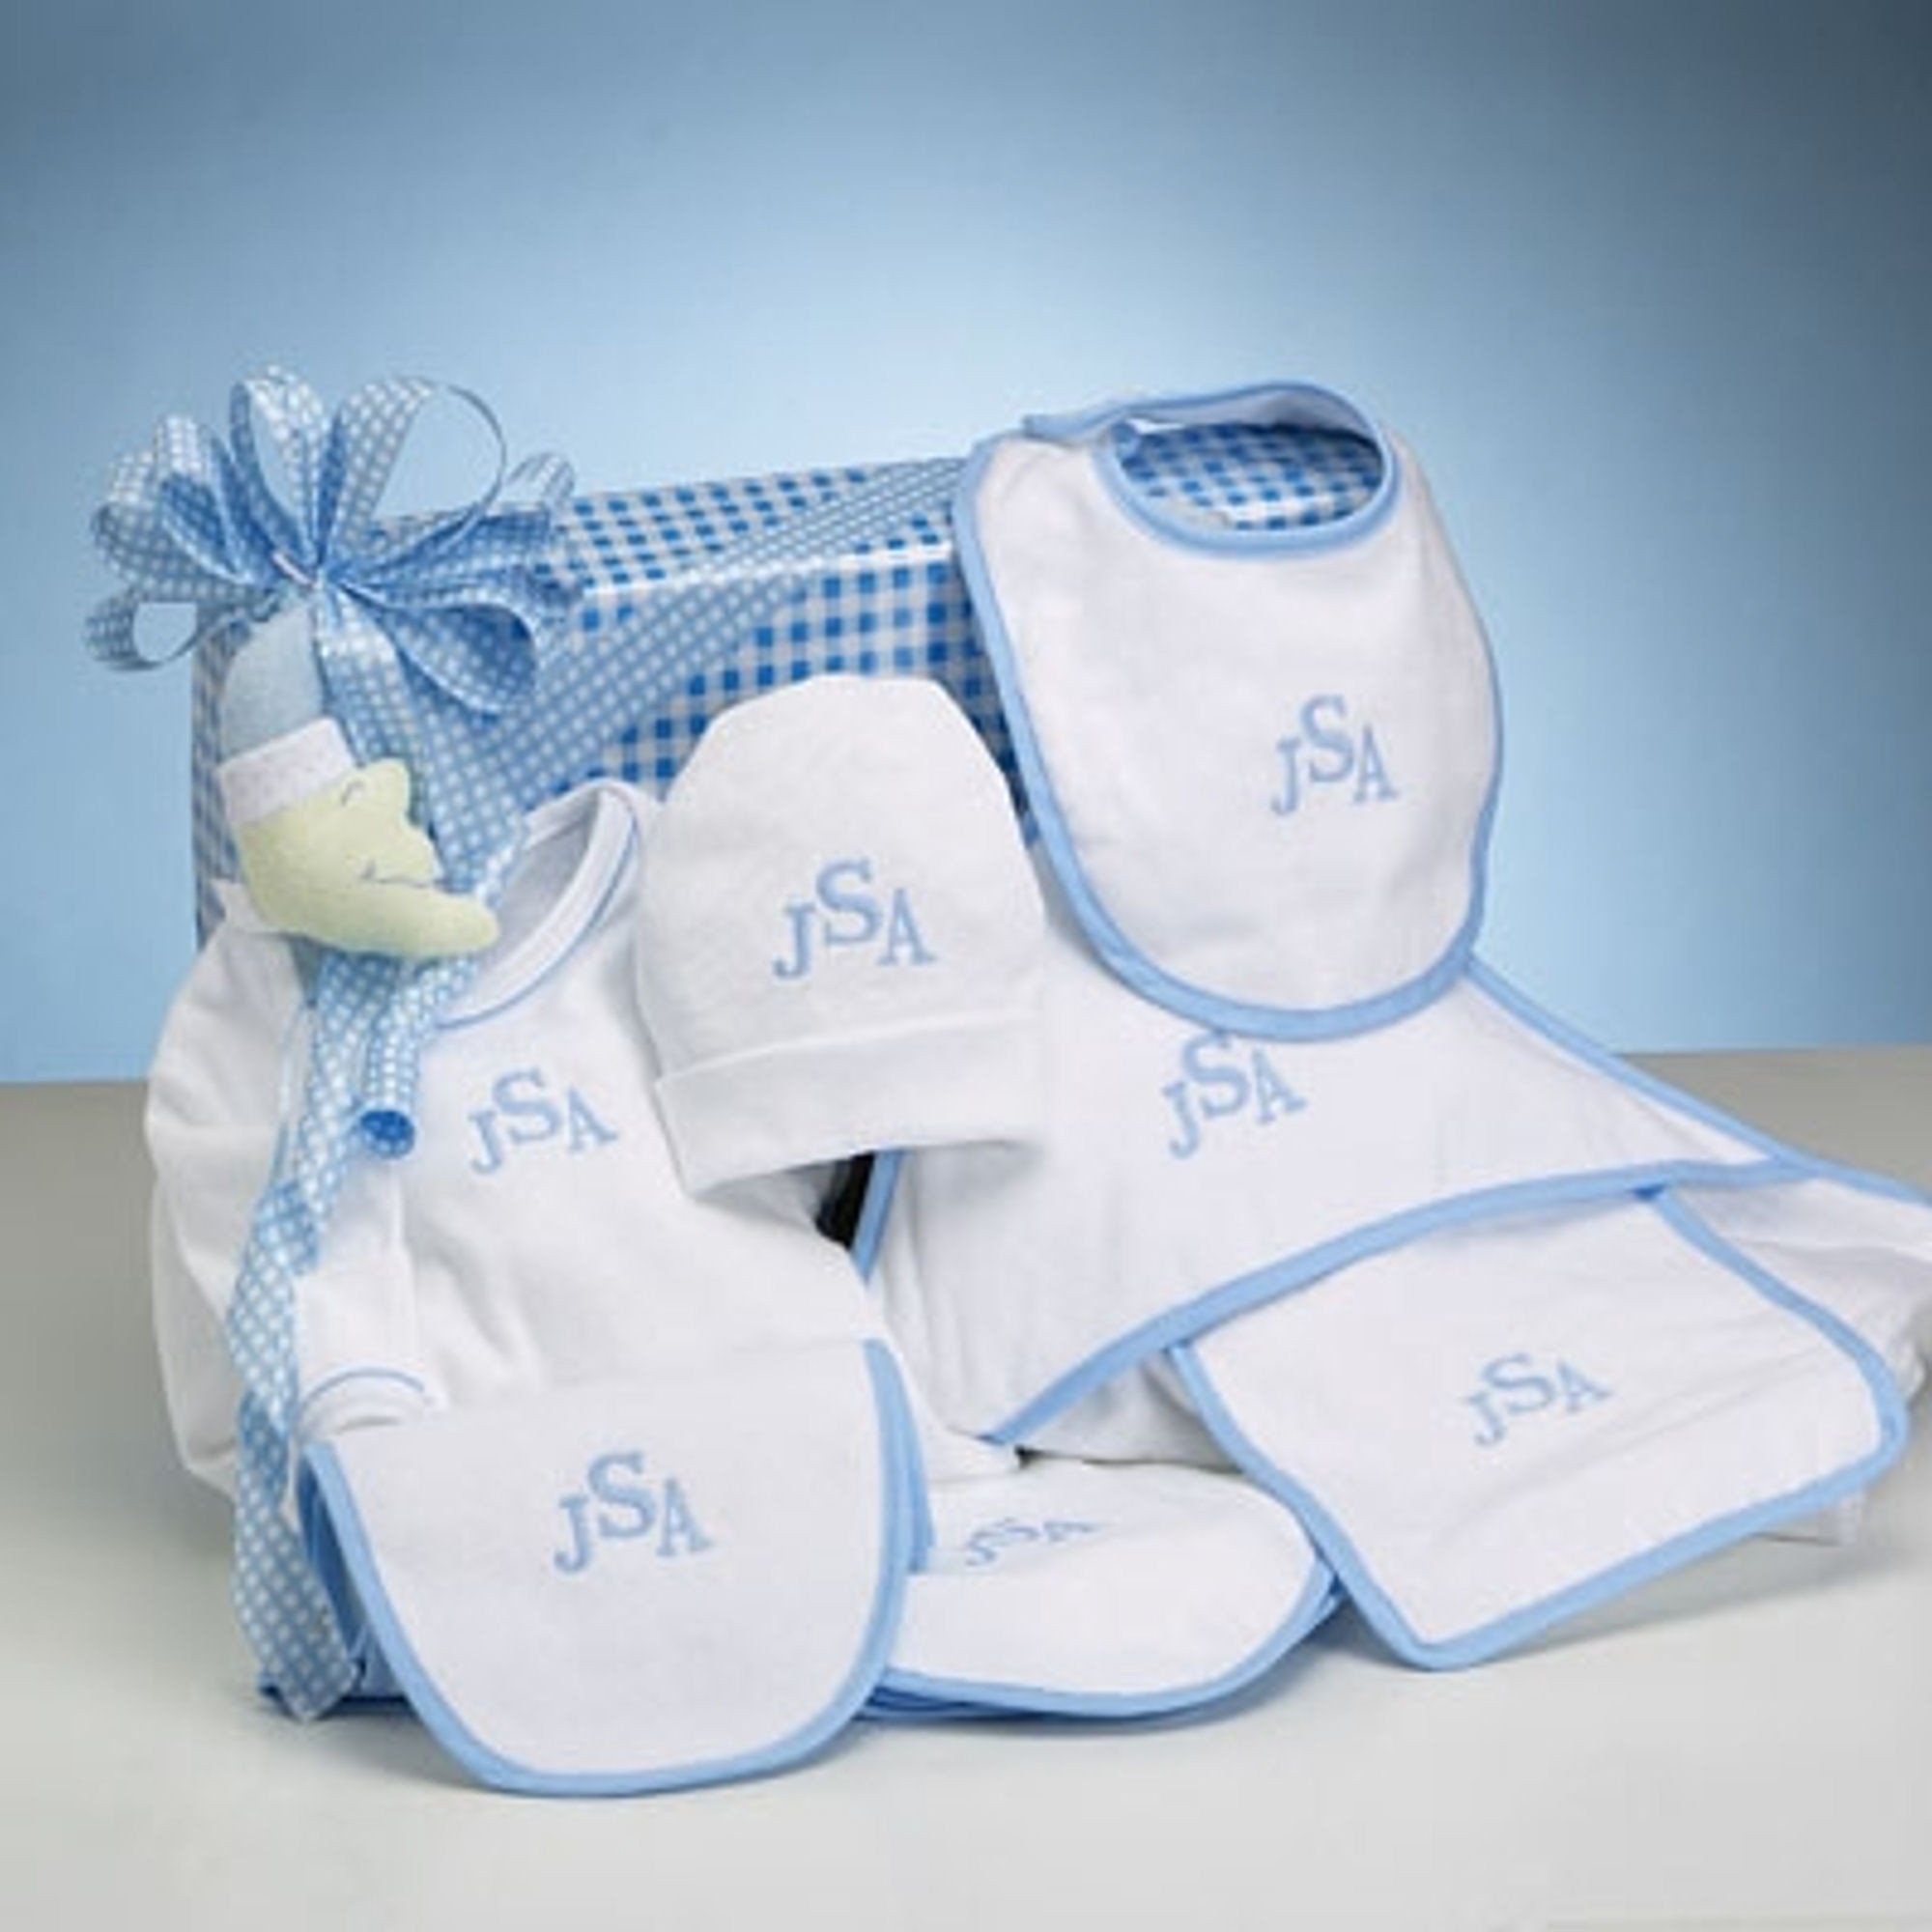 Personalized Gifts For Baby Boy
 Layette Baby Boy